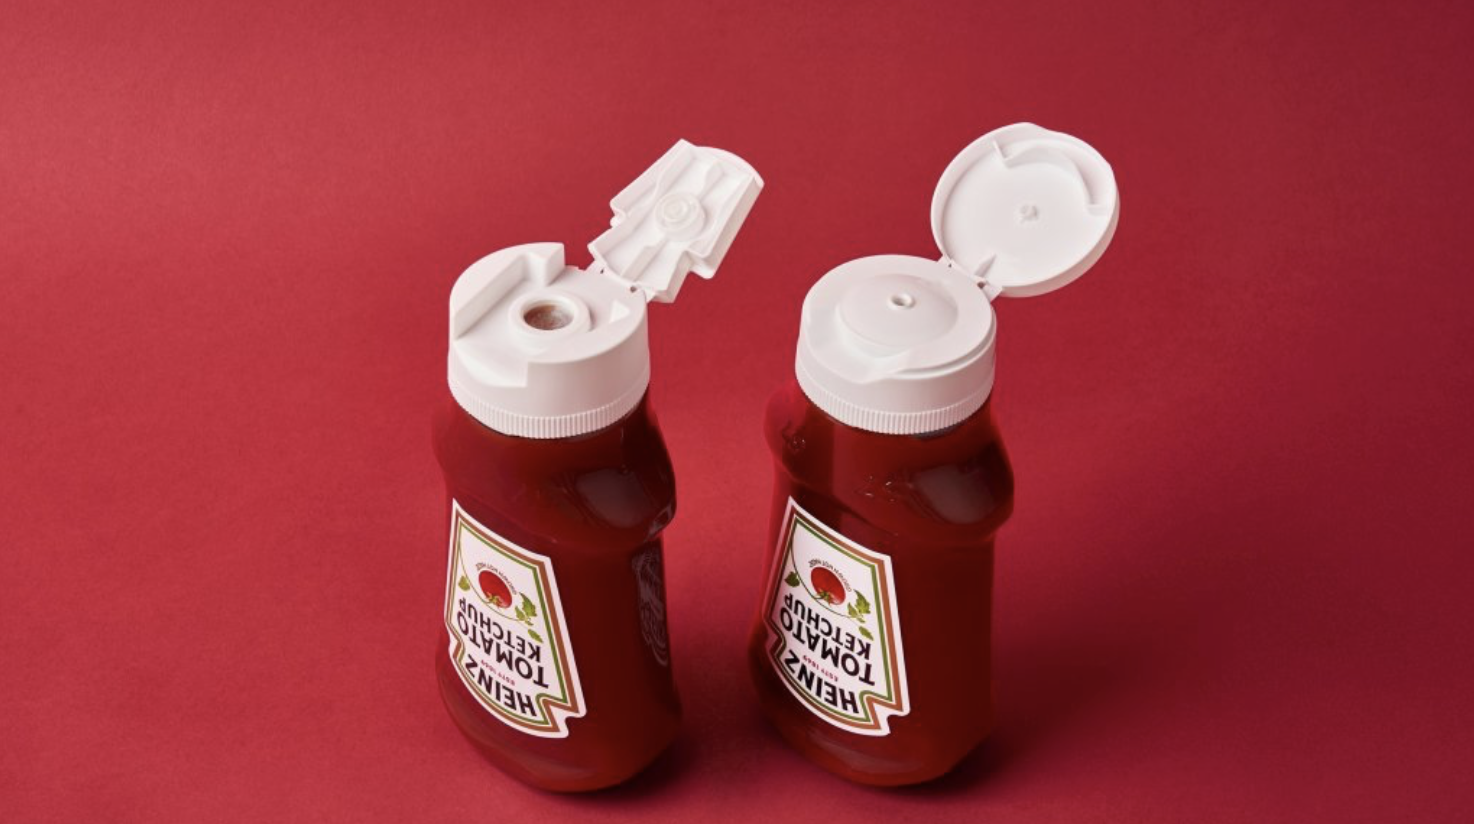 Kraft-Heinz-introduces-first-fully-recyclable-ketchup-cap-credit-Berry-Global.png